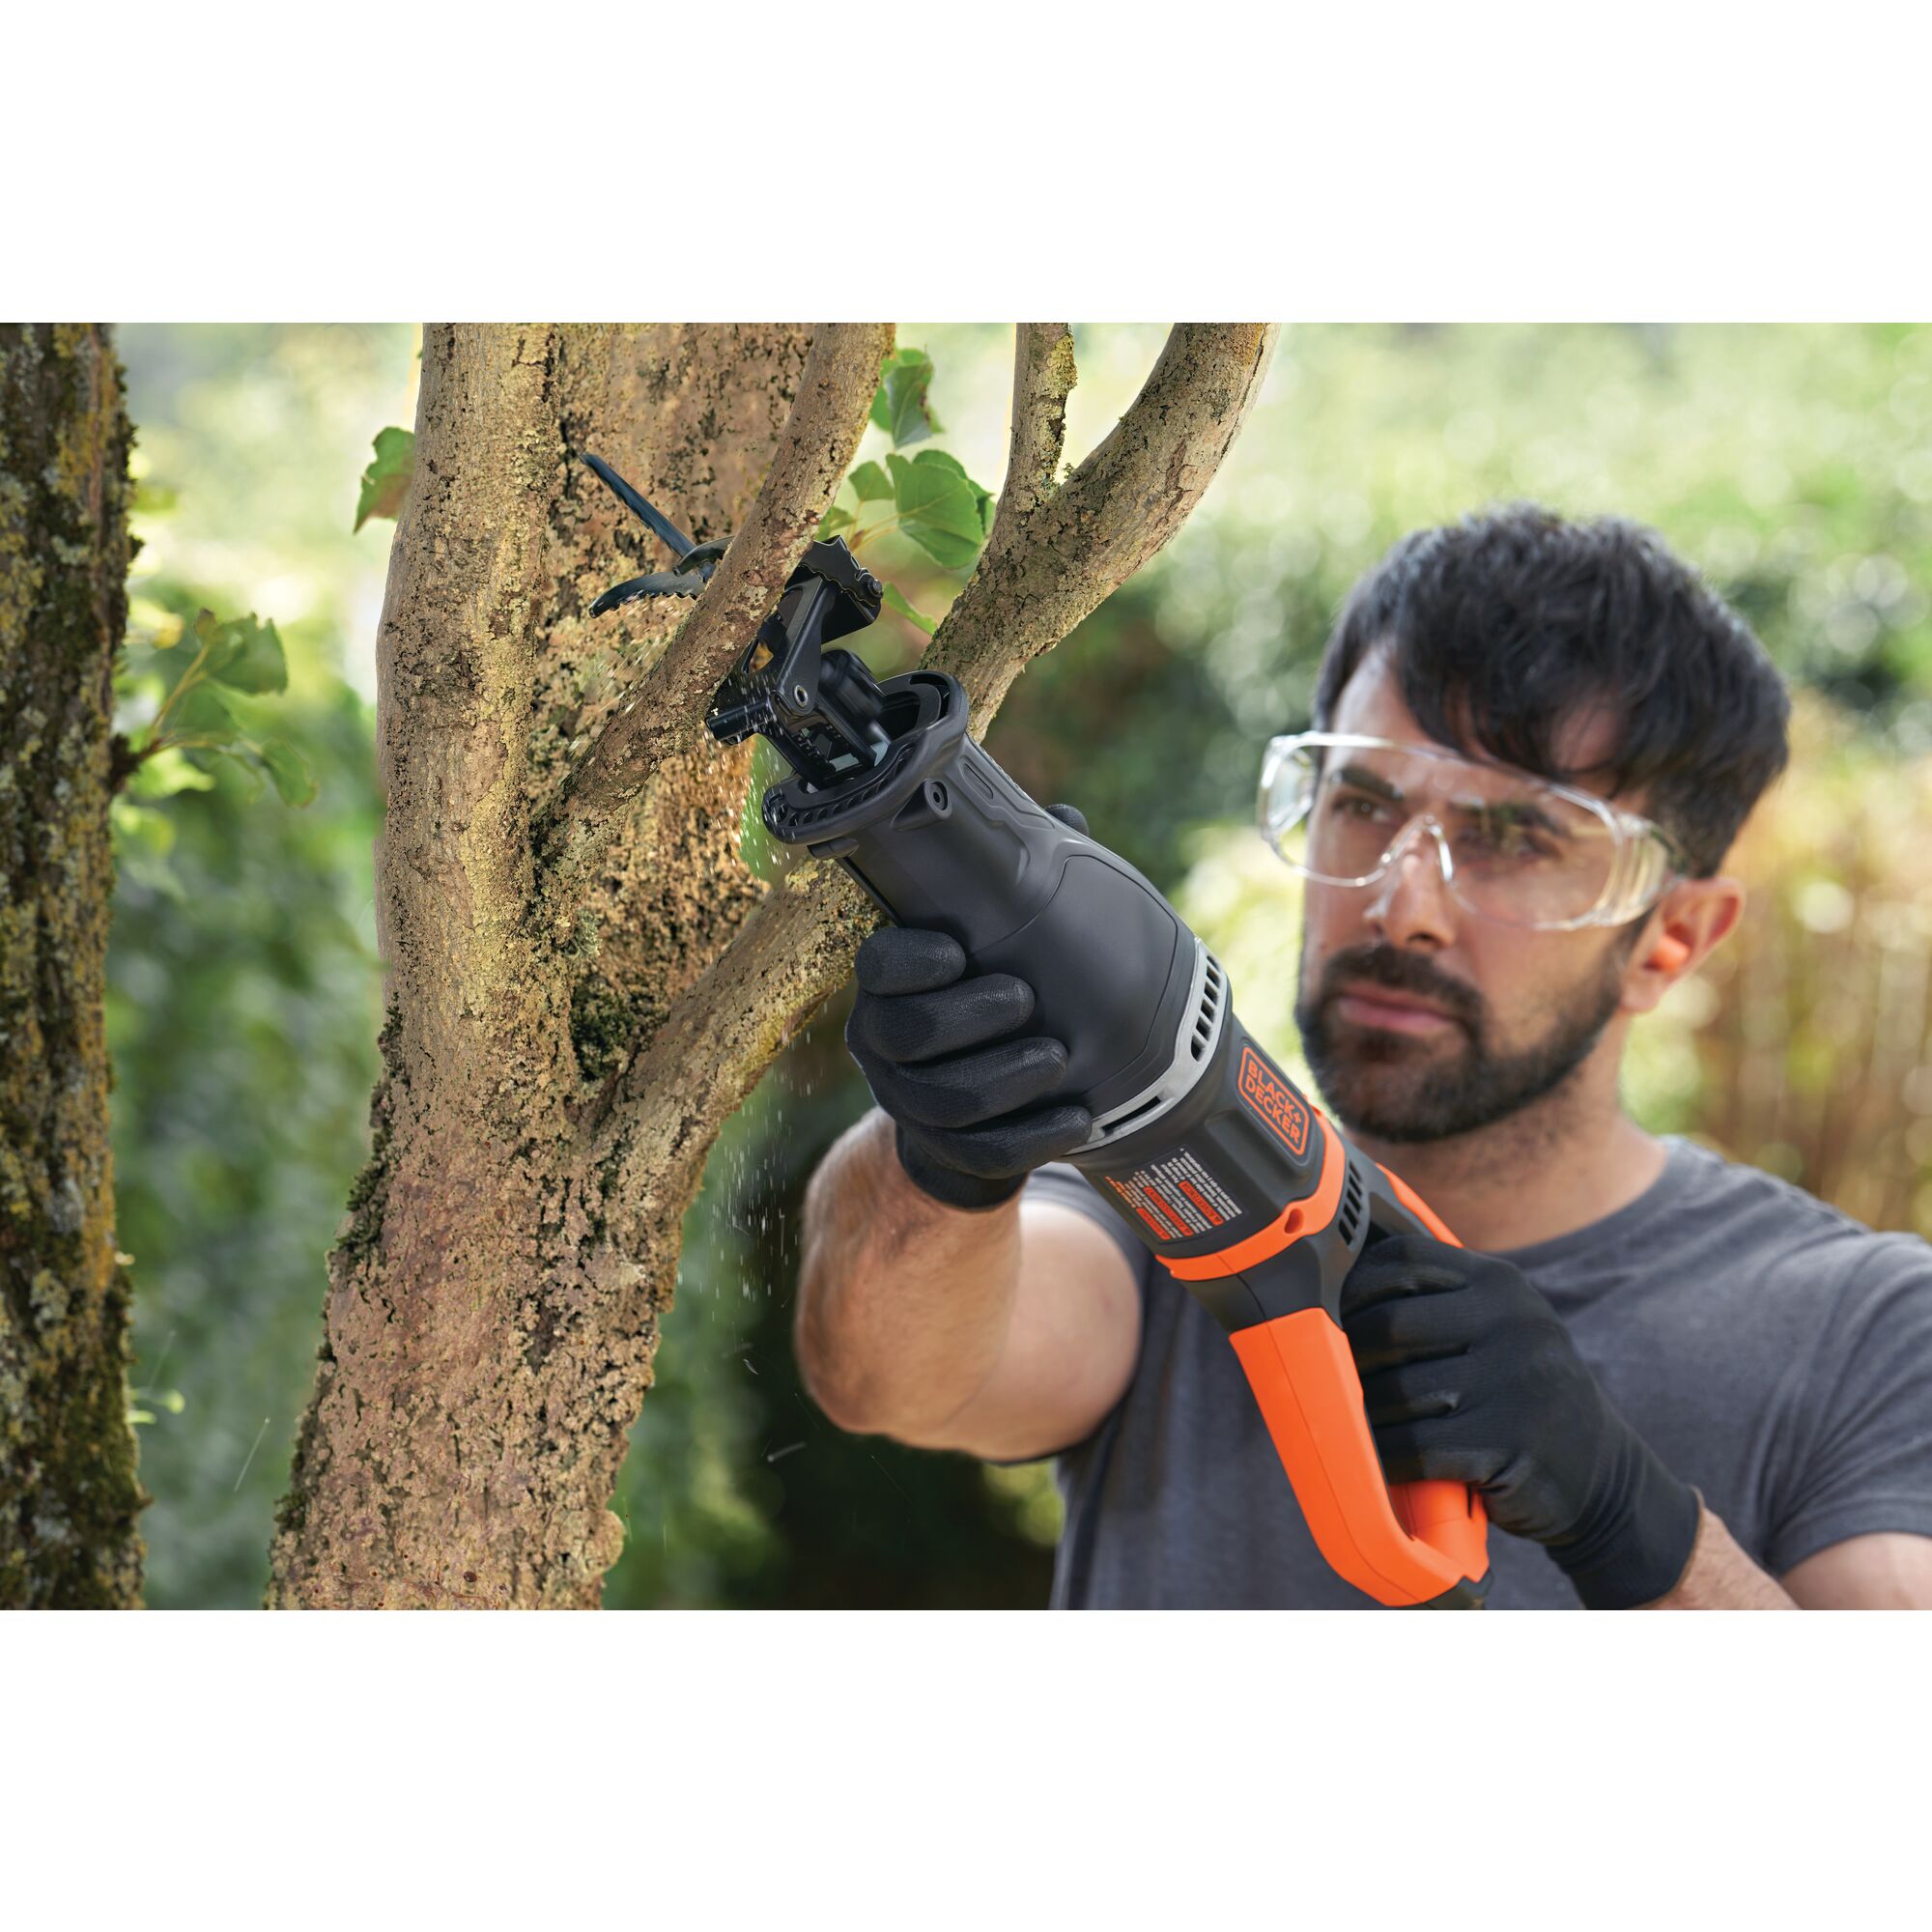 Electric Pruning Saw With Branch Holder, 7 Amp